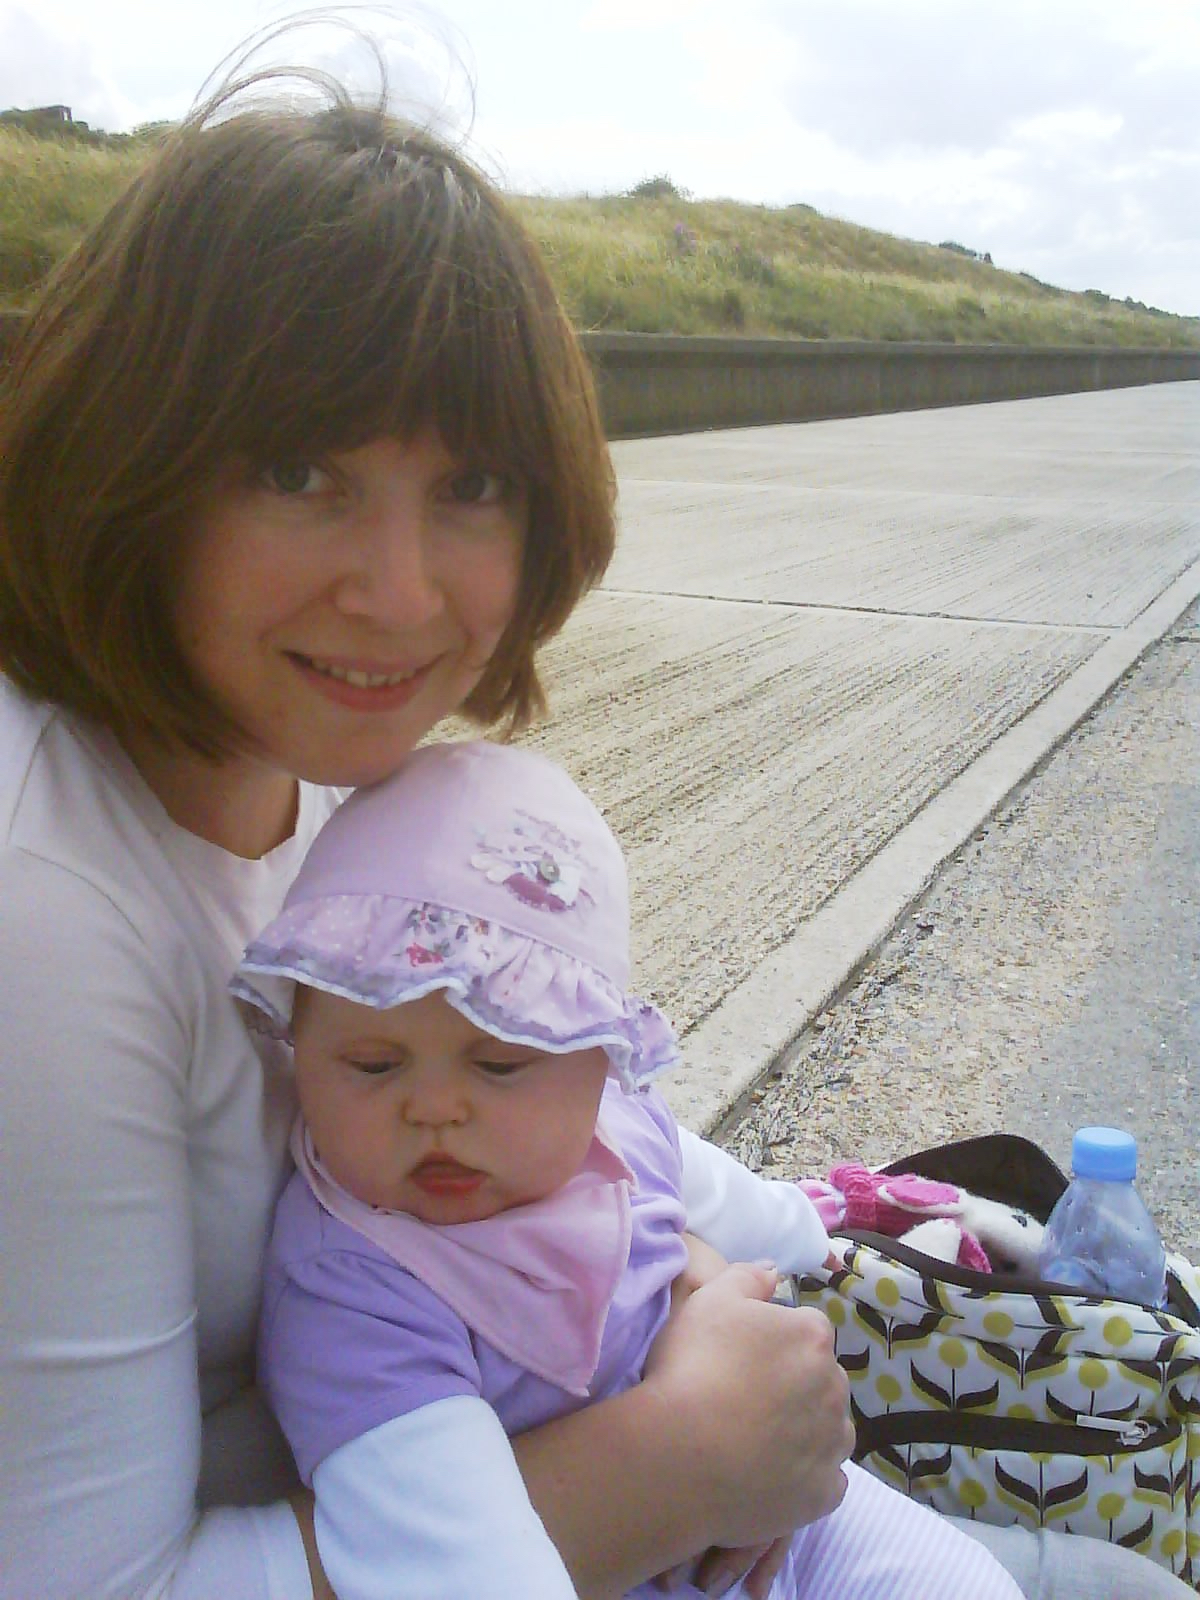 A woman and her baby daughter who is wearing a sun hat, sit outside near a grassy hill.